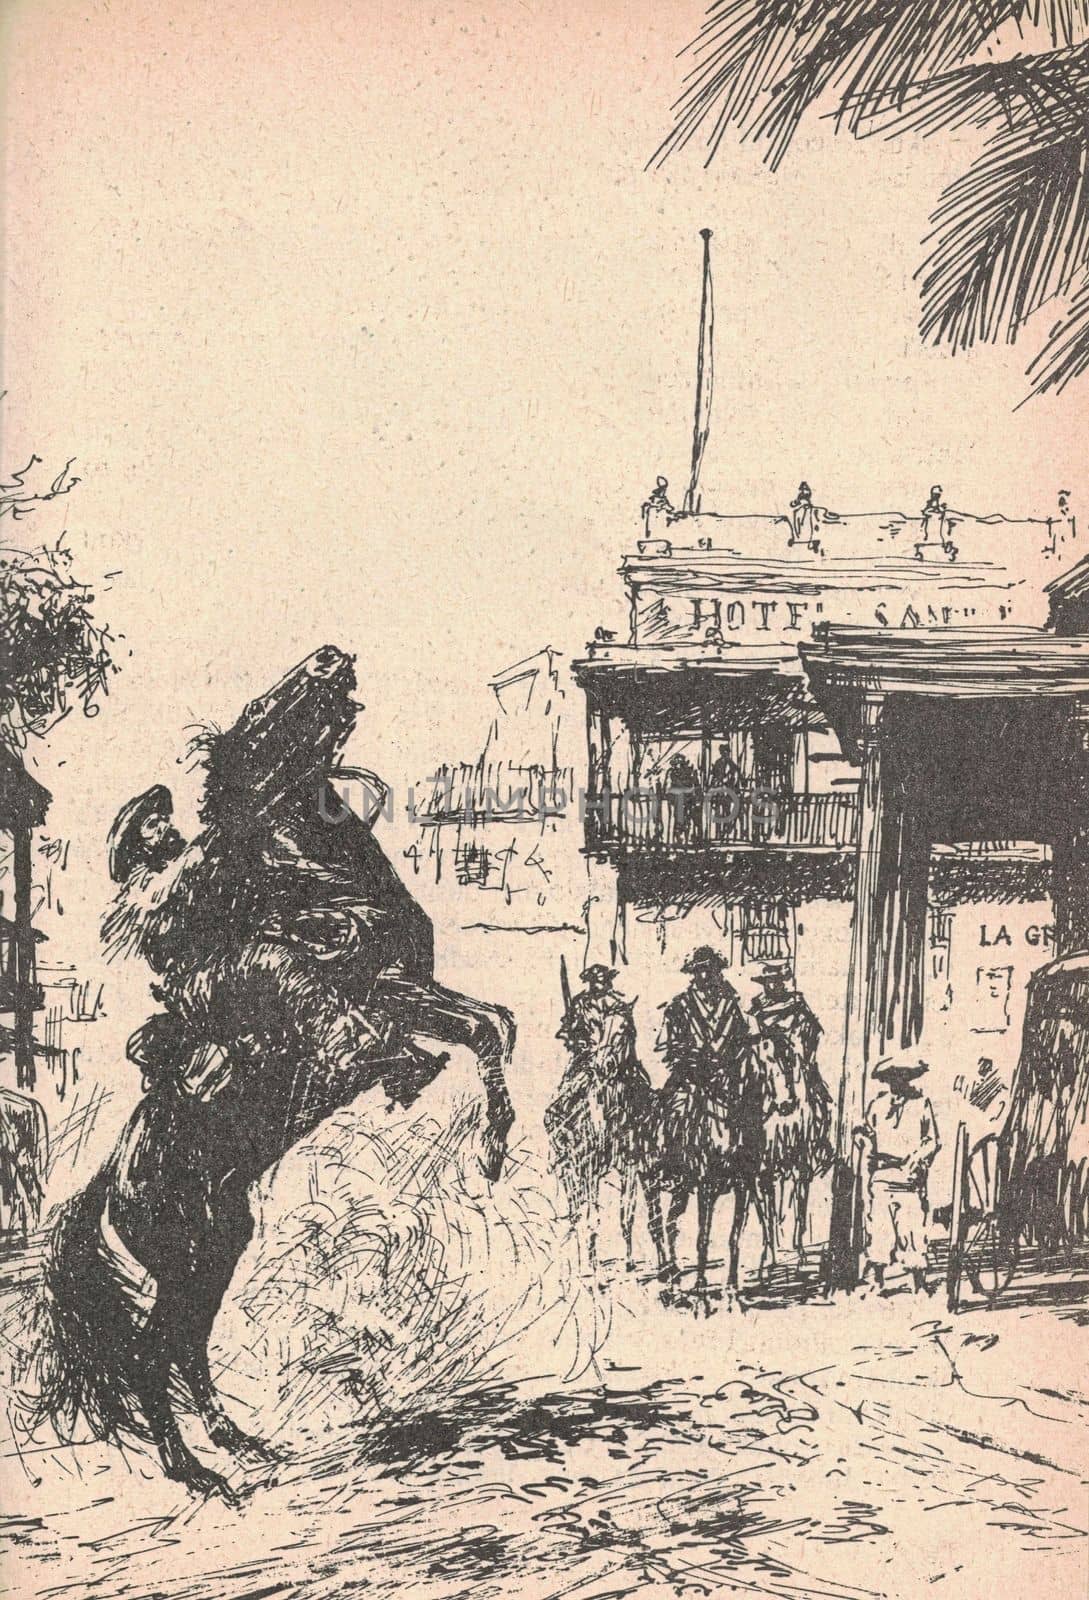 Black and white illustration shows street in a South American city in the 19th century. Drawing shows a man tames a rearing horse. Vintage black and white picture shows adventure life in the previous century.